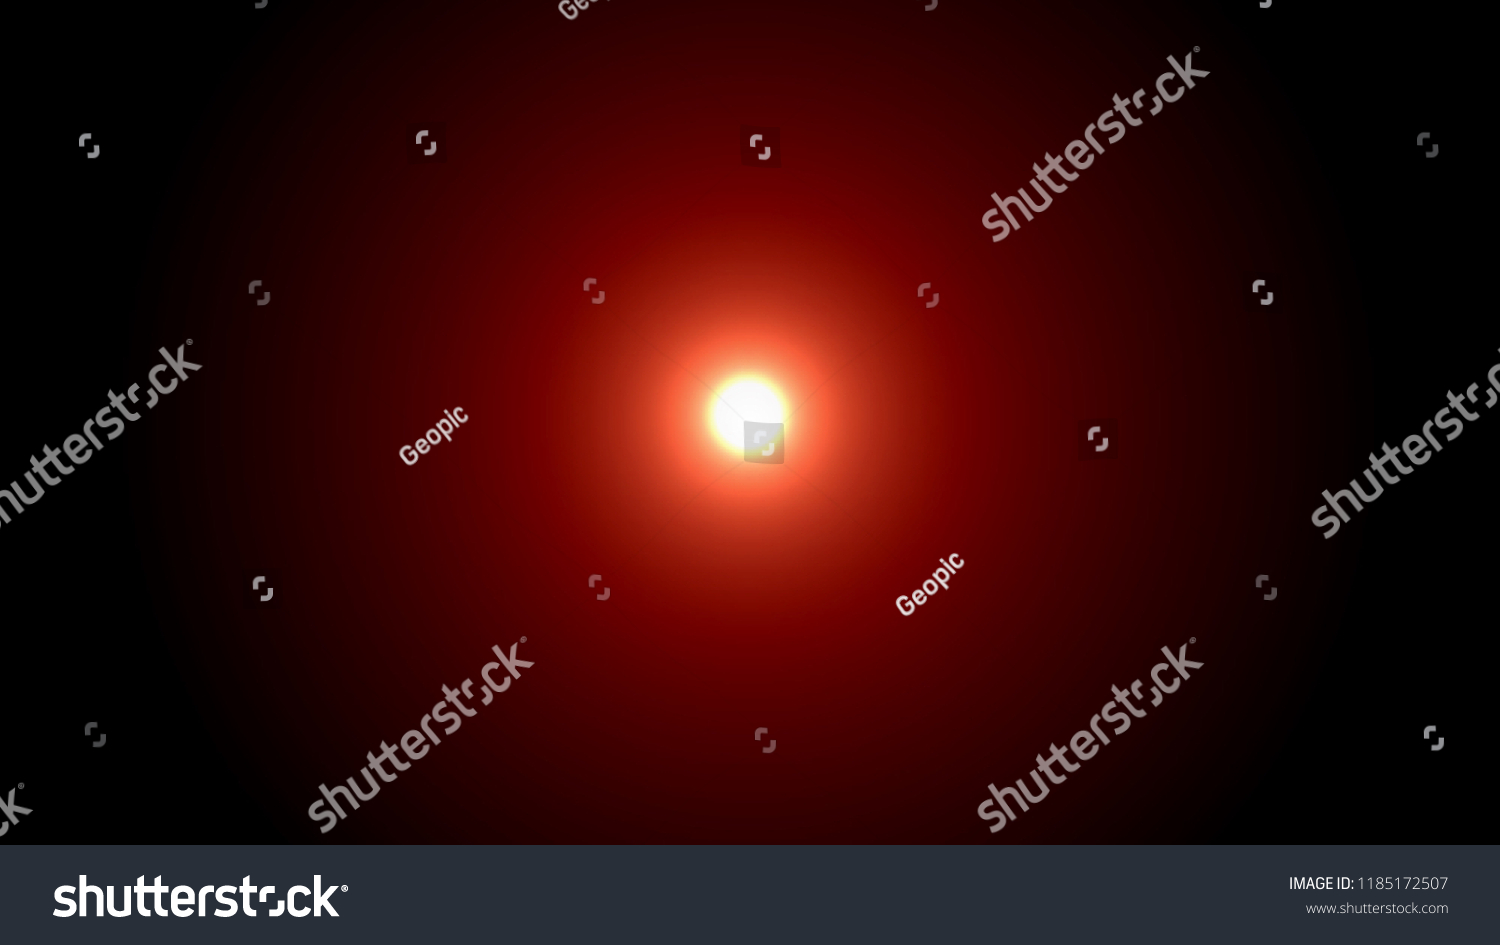 Illustration of glowing sun or light centered on dark vignetted red background  #1185172507